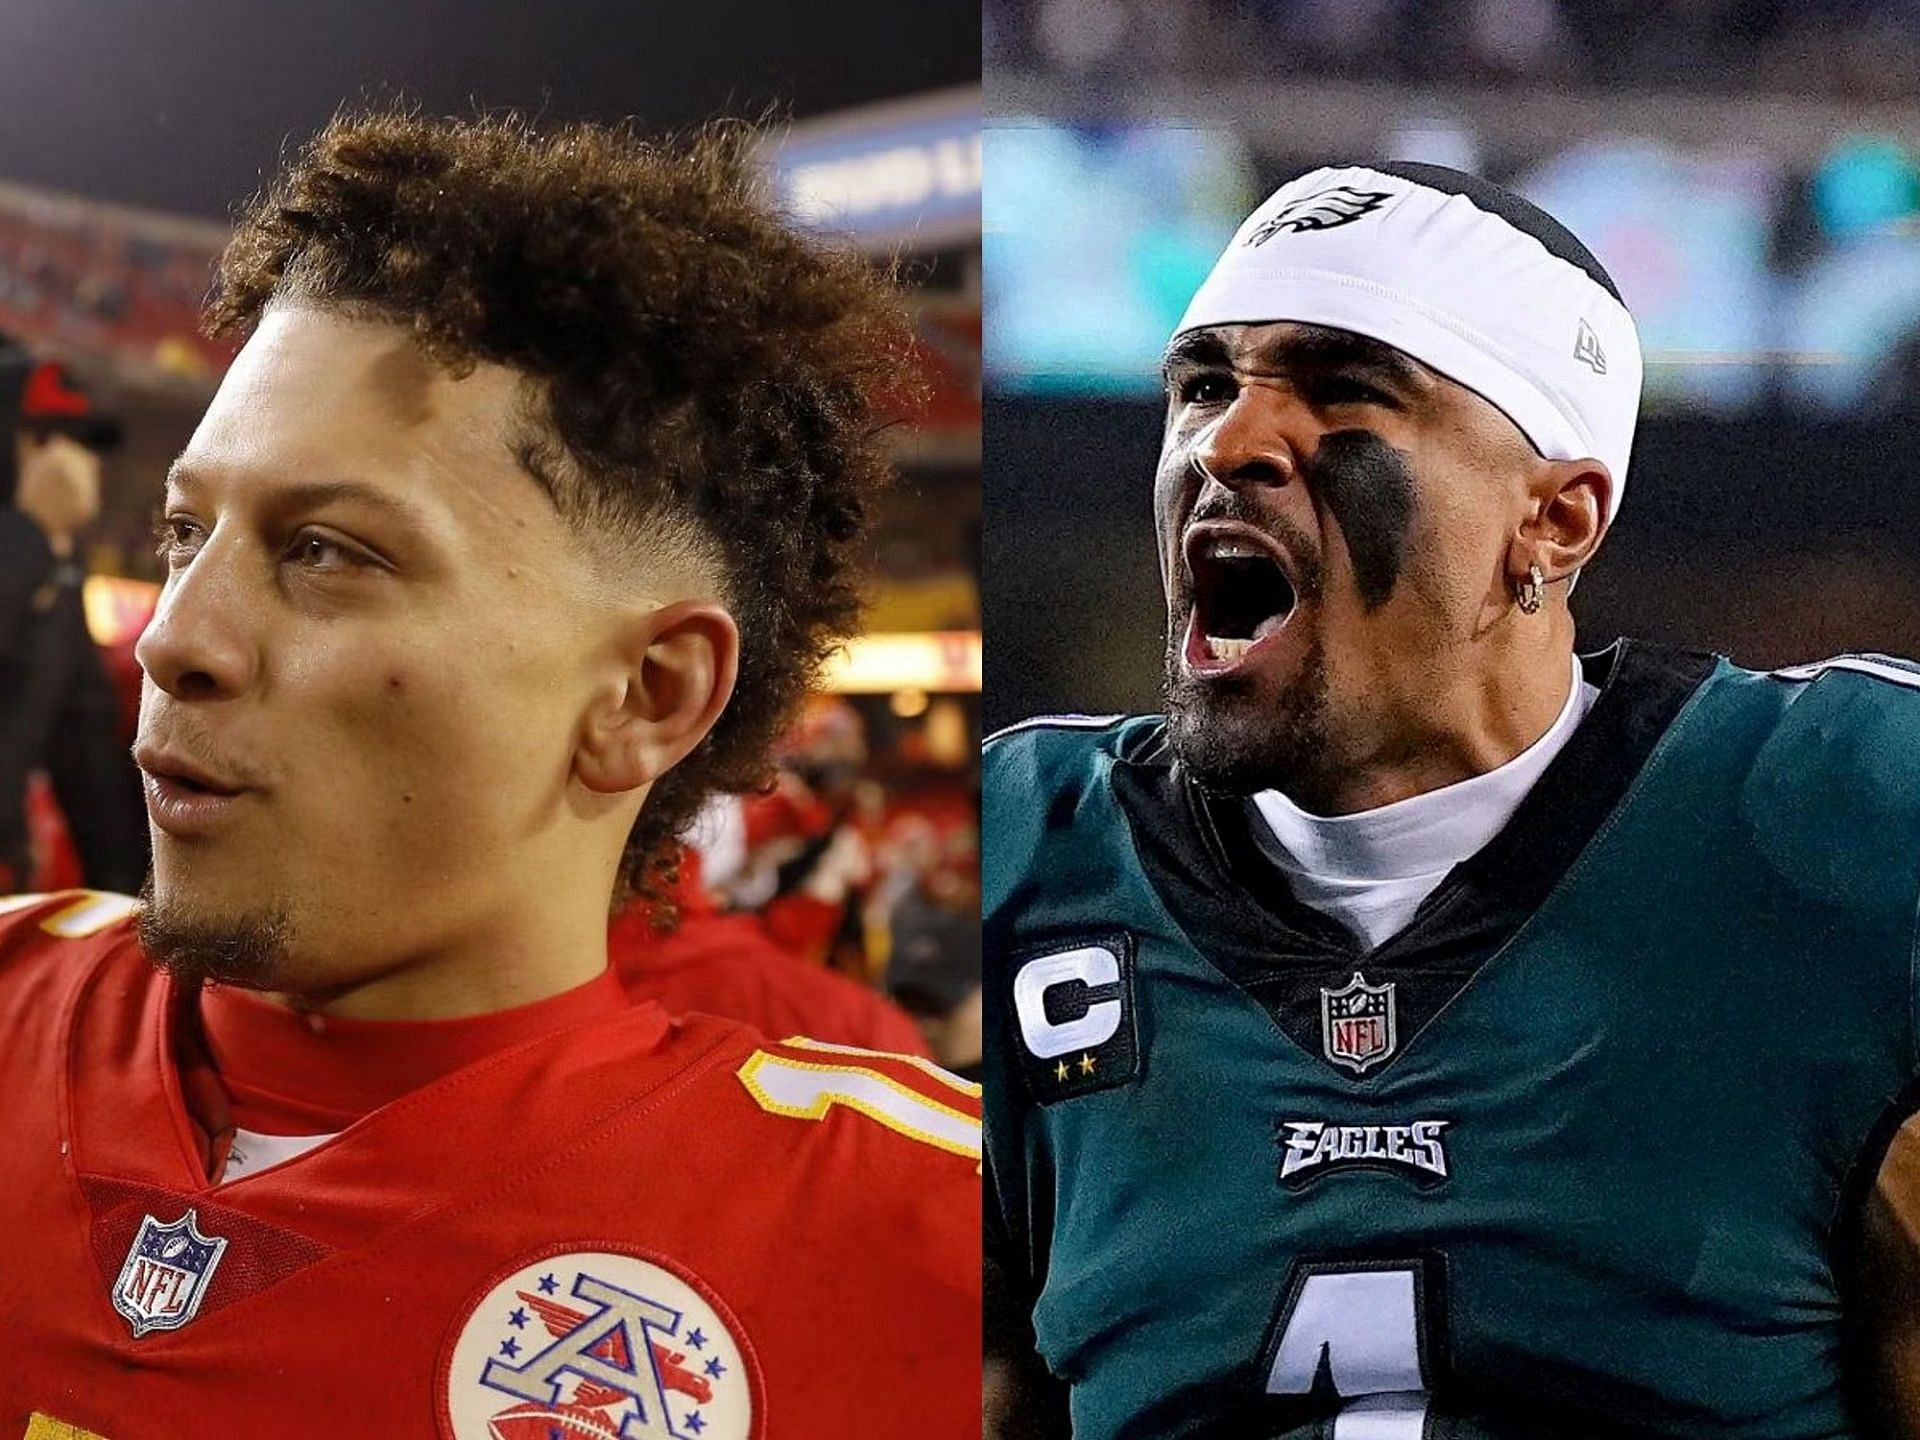 Patrick Mahomes and Jalen Hurts prepare to take on opponents in AFC and NFC conference championship